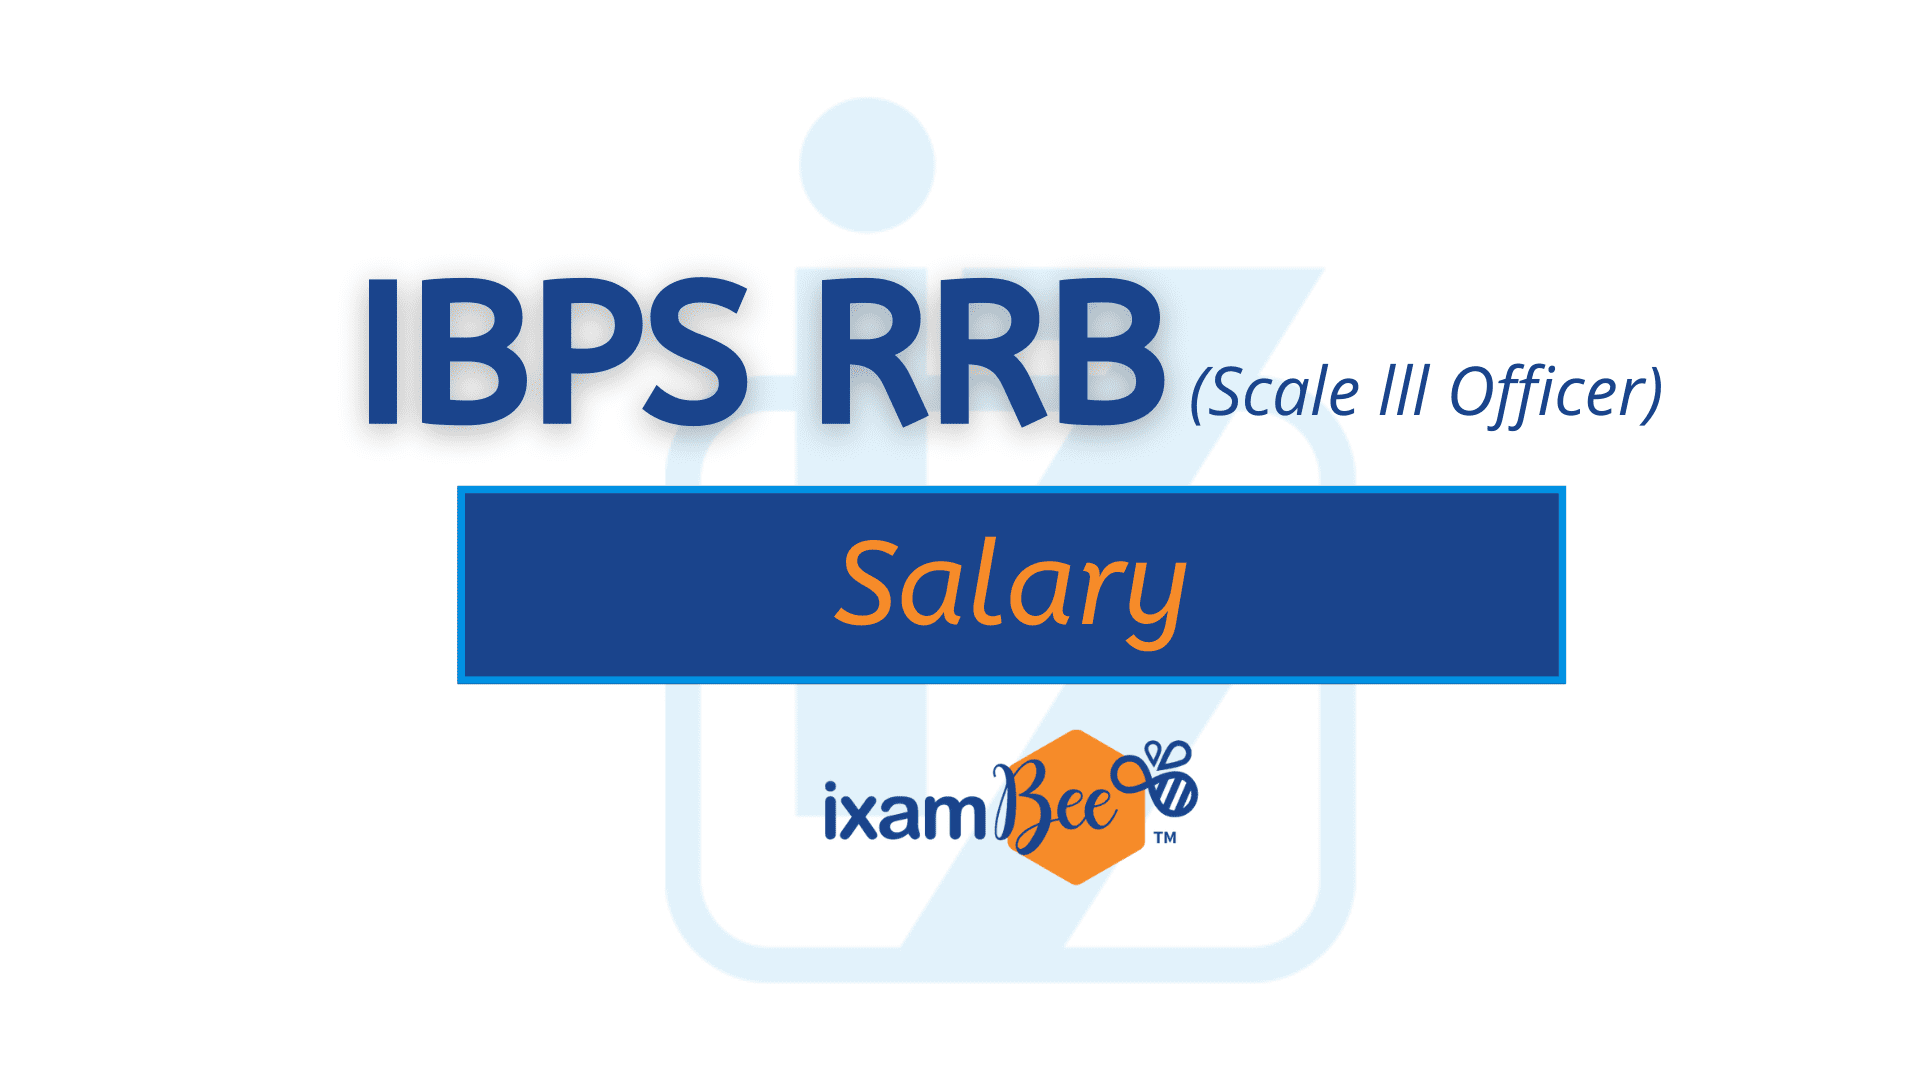 IBPS RRB Officer Scale III Salary